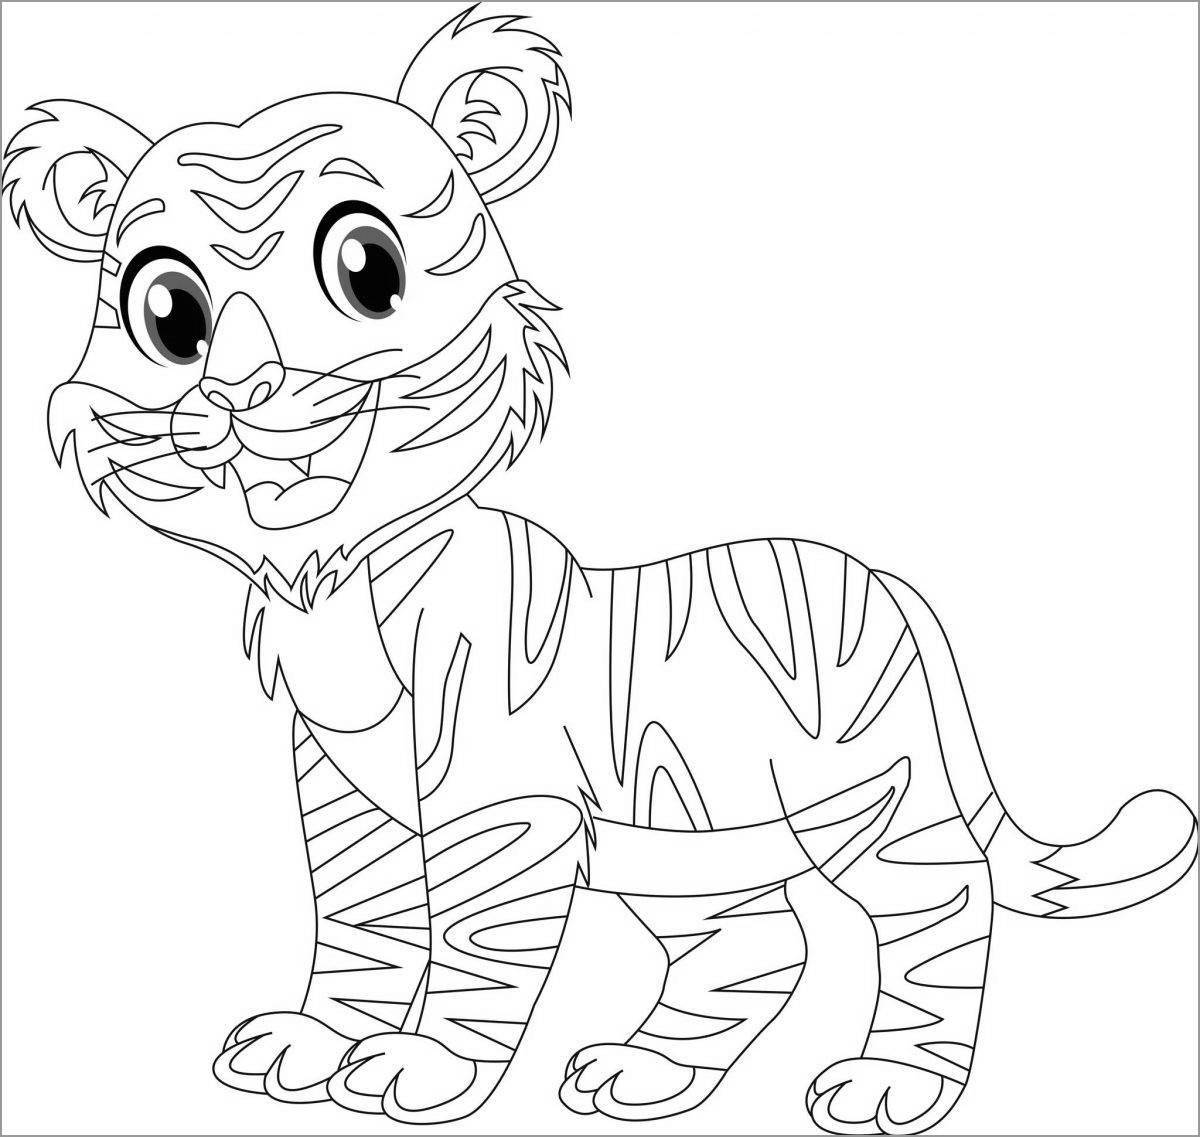 Glitter tiger coloring book for 3-4 year olds